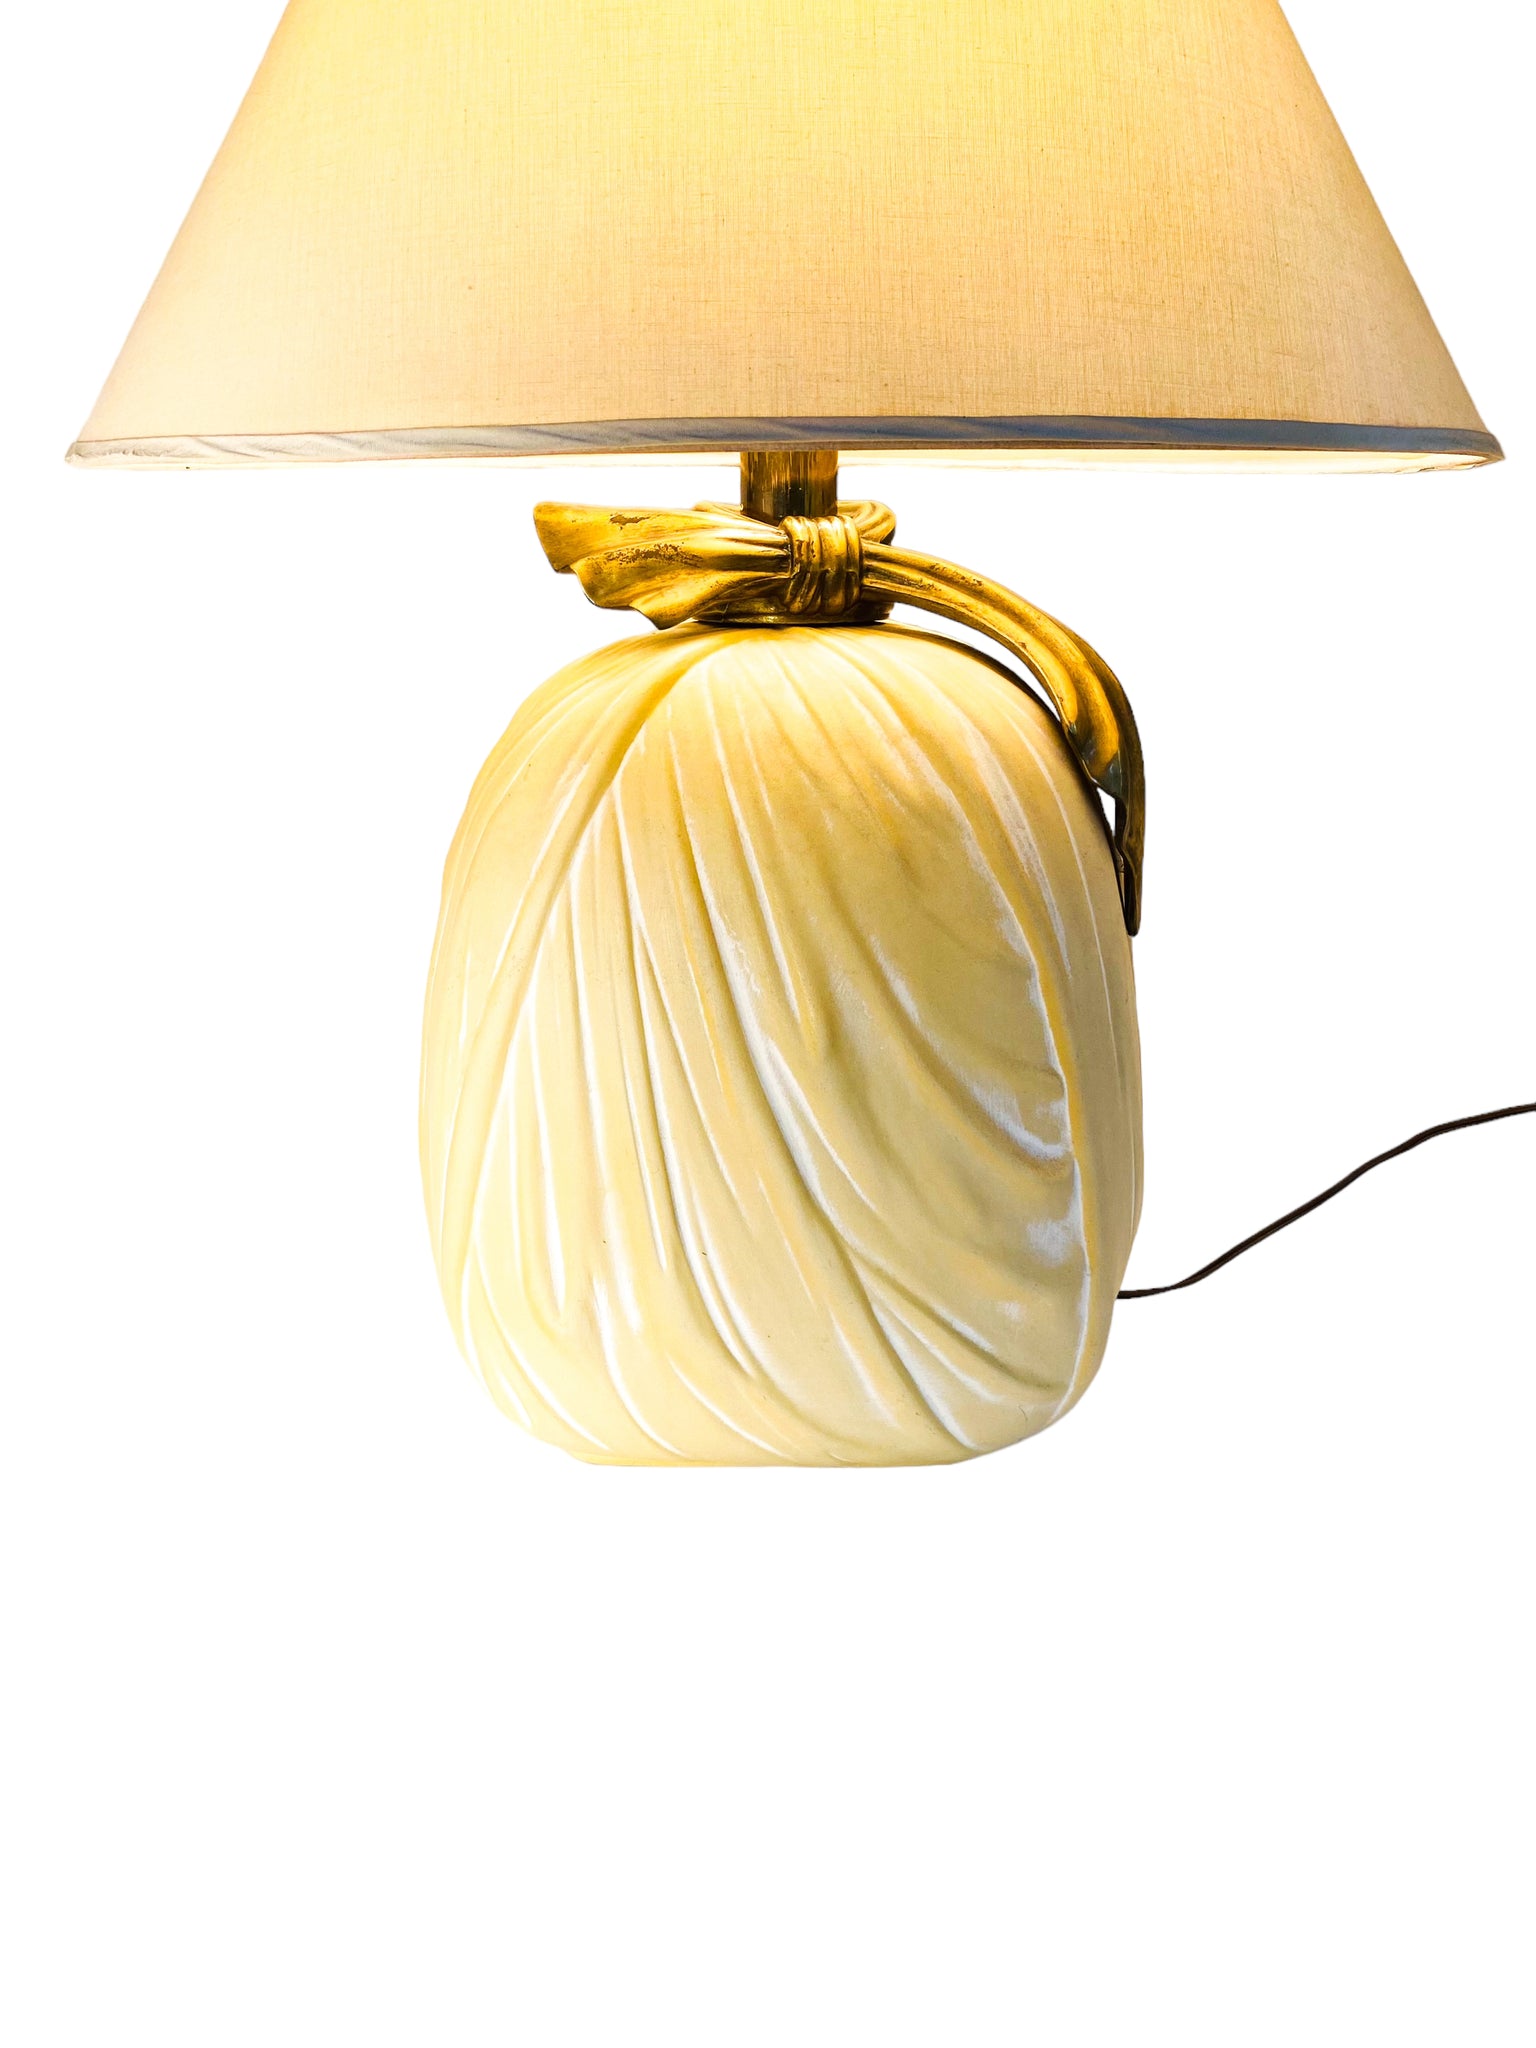 1982 Chapman Draped-Fabric Table Lamp, Local Pickup Only**